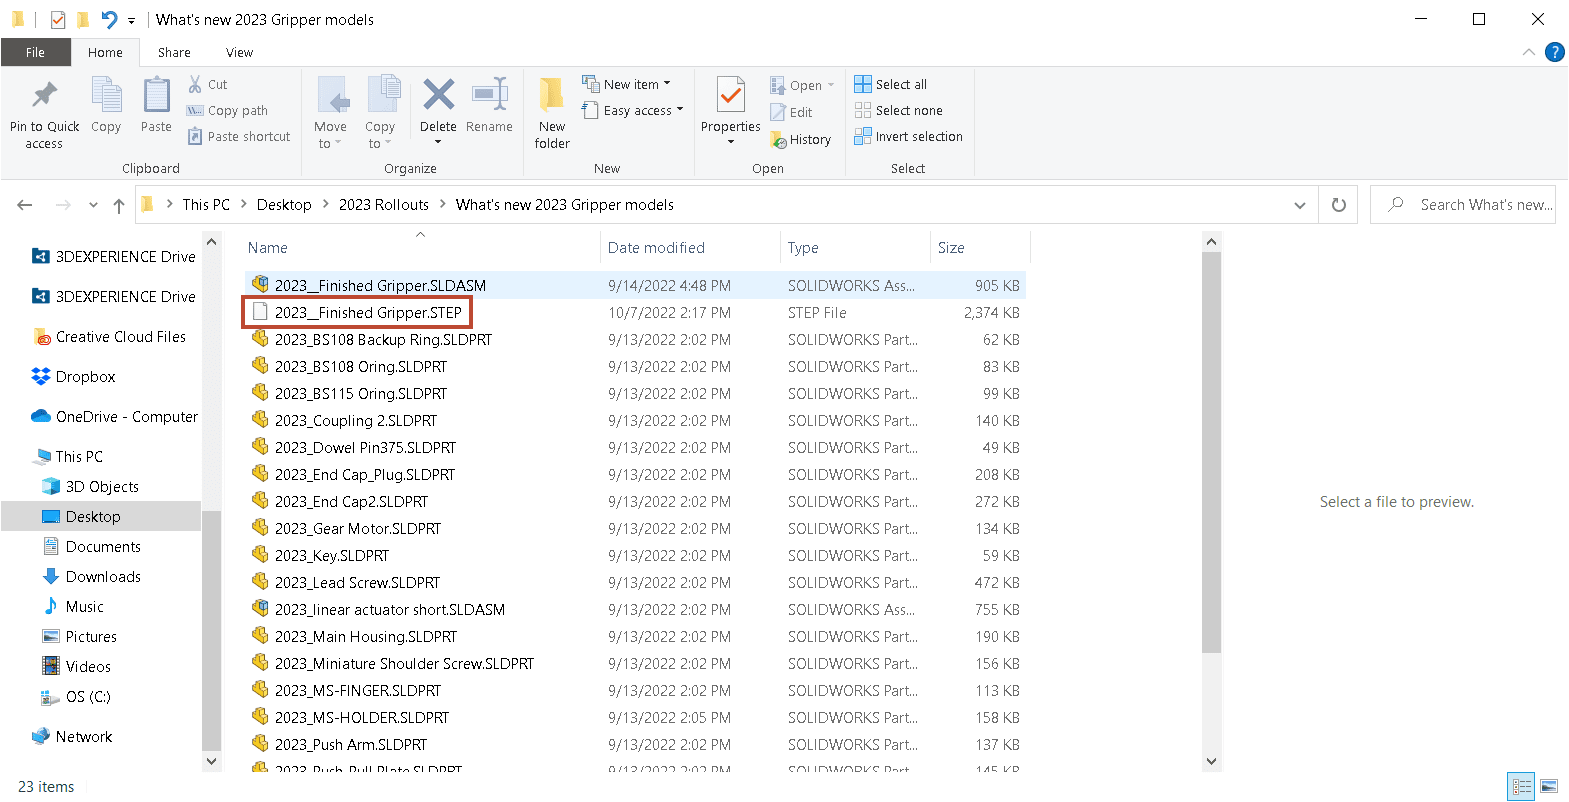 When saving assemblies as STEP files prior to SOLIDWORKS 2023, you often dealt with the very large, cumbersome files, seen here.